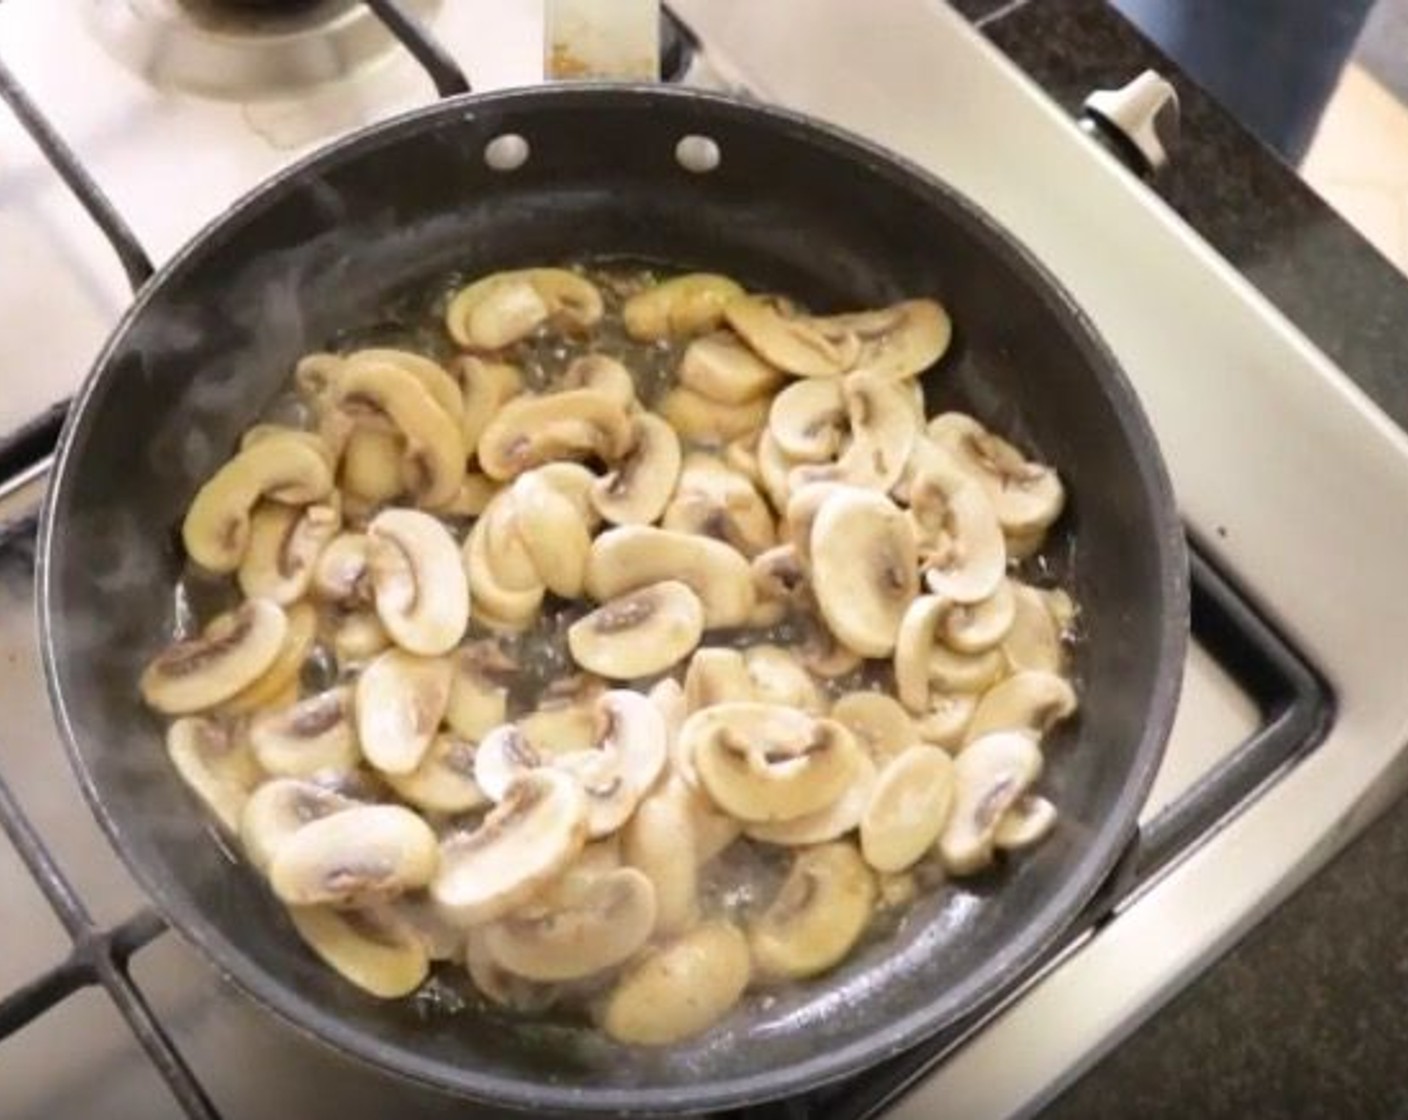 step 10 Add the sliced mushrooms into the oil and mix. Cook for about 3-4 minutes, then season with Sea Salt (to taste) and Ground Black Pepper (to taste).